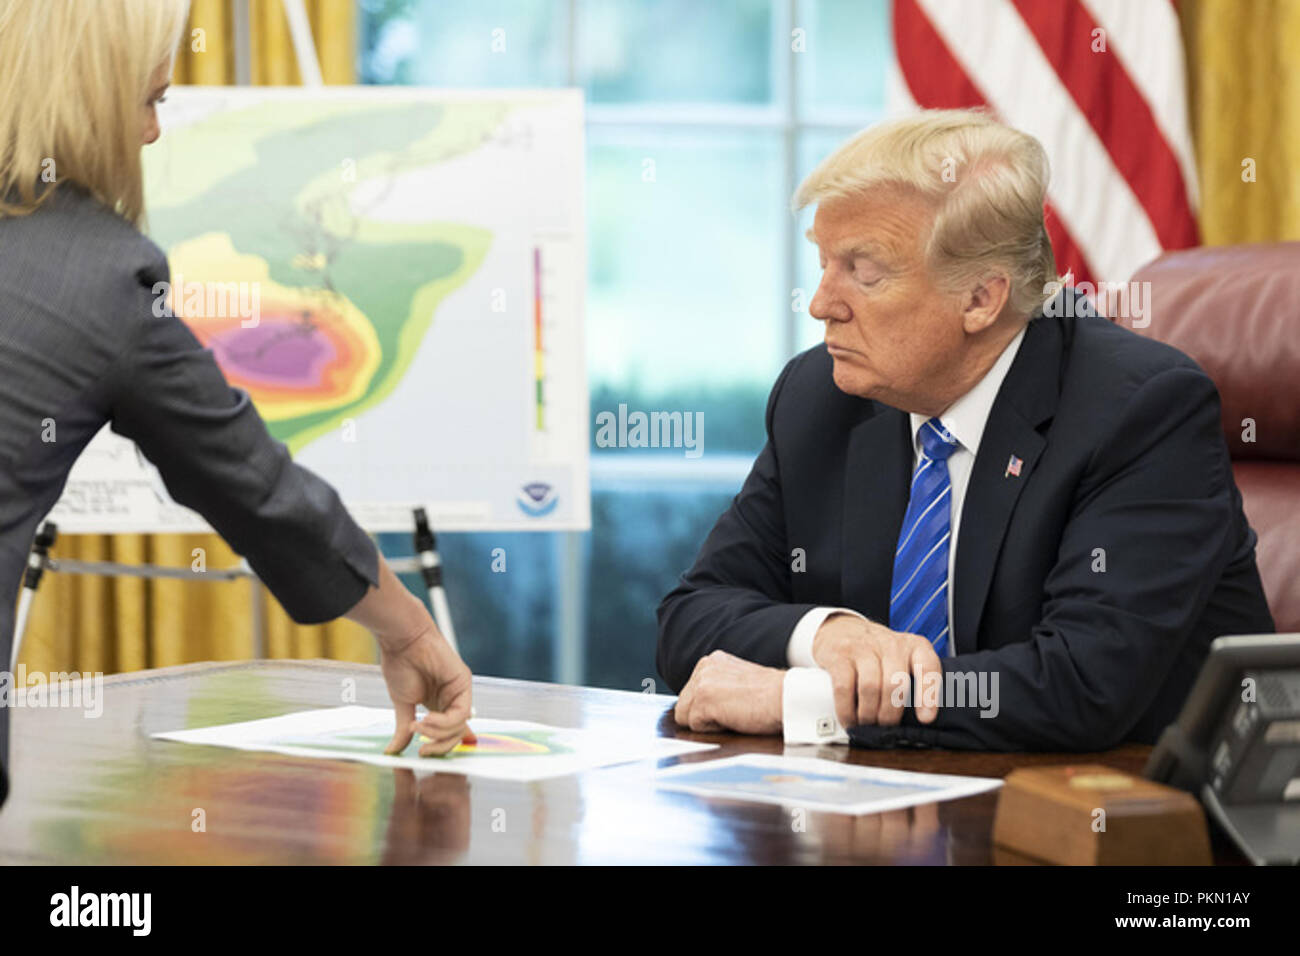 President Donald J. Trump, joined by Vice President Mike Pence and Secretary of Homeland Security Kirstjen Nielsen, receives an emergency preparedness briefing on Hurricane Florence Thursday, Sept. 13, 2018, in the Oval Office of the White House  People:  President Donald Trump Stock Photo